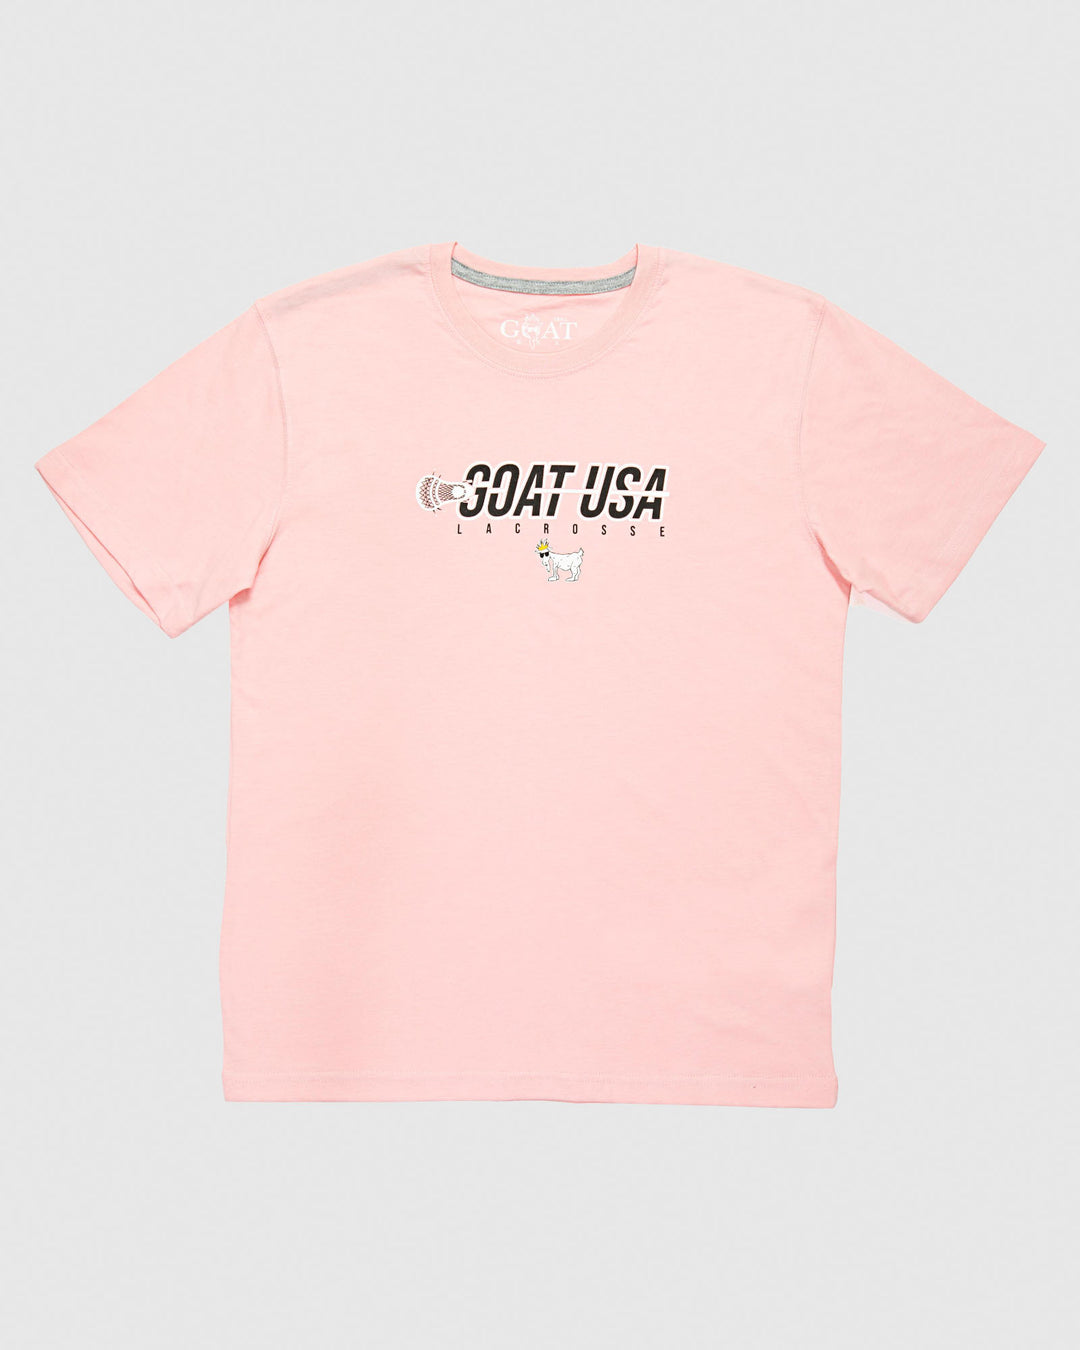 Pink shirt with lacrosse stick that goes through the wording "GOAT USA"#color_pink